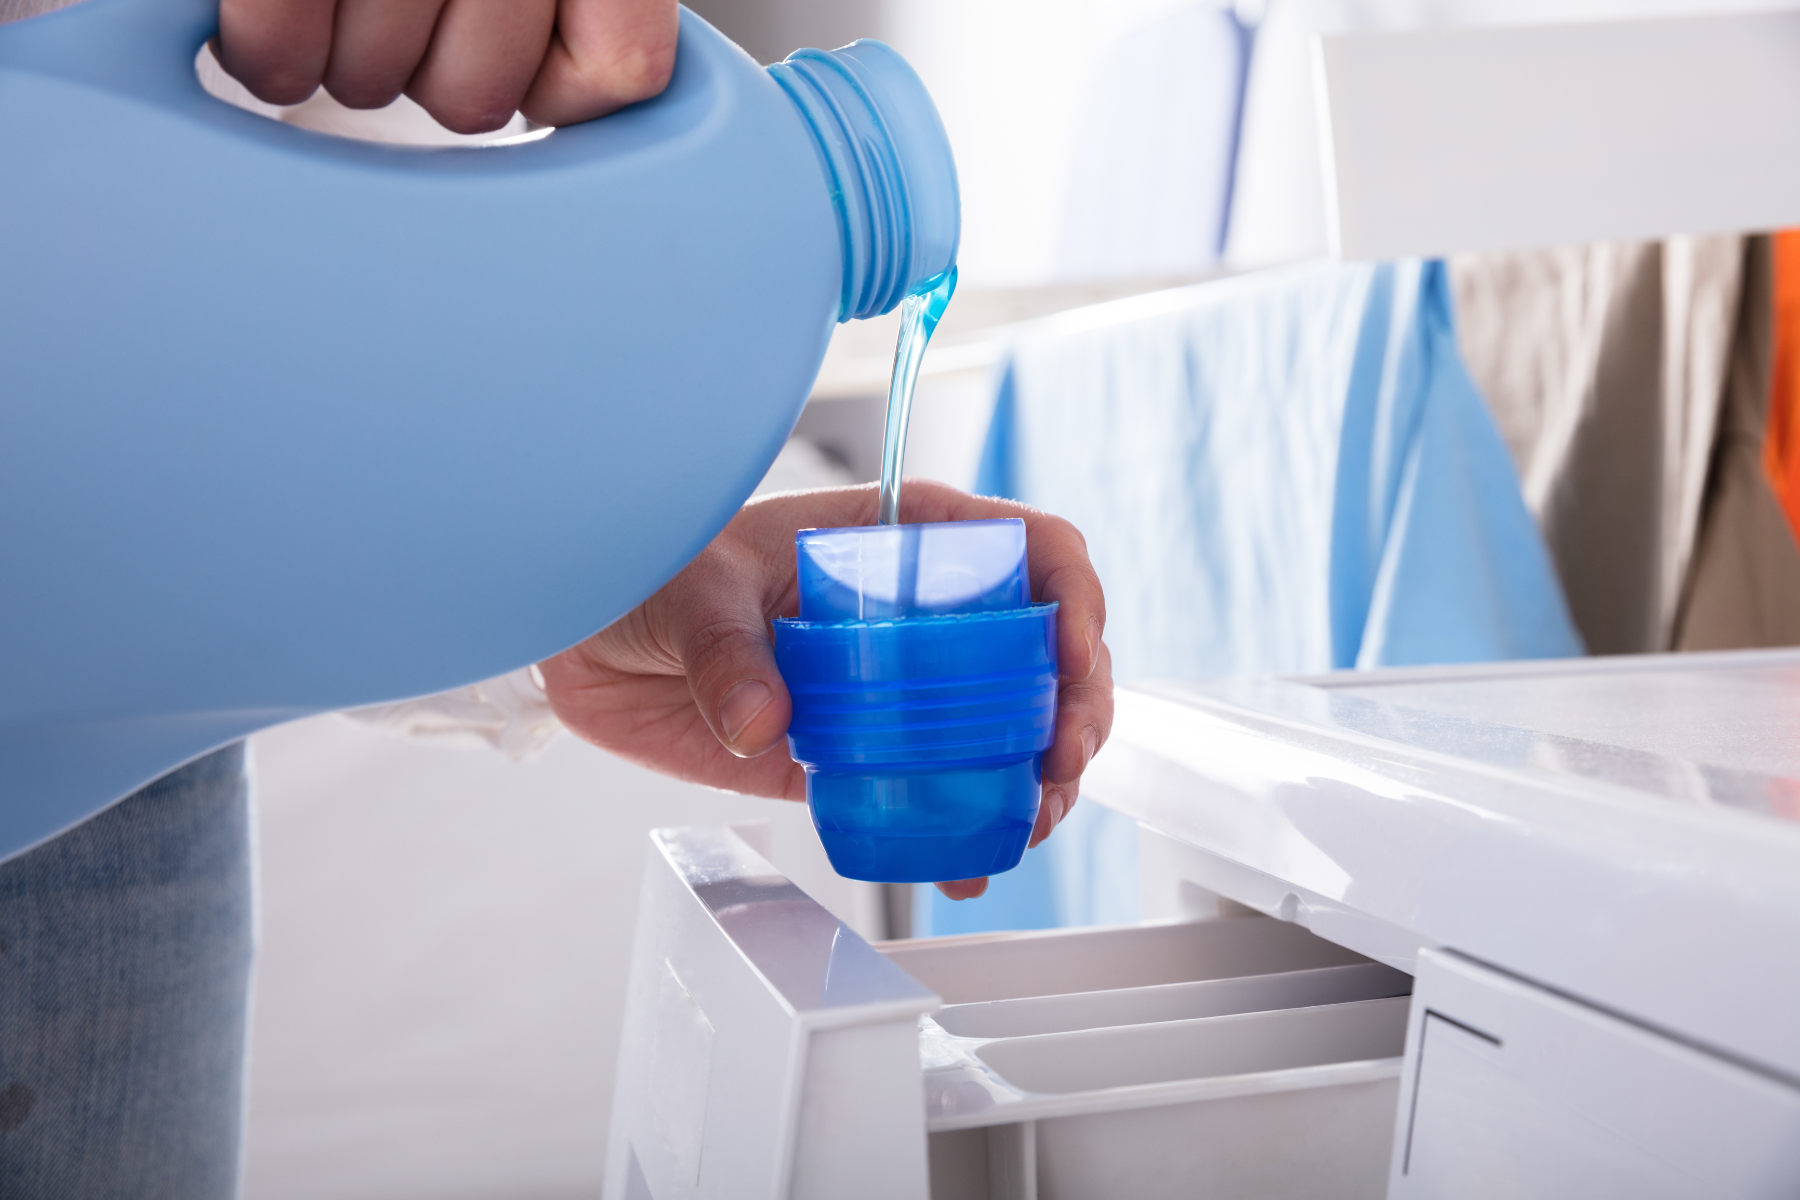 Industrial laundry chemicals including detergents and fabric softeners